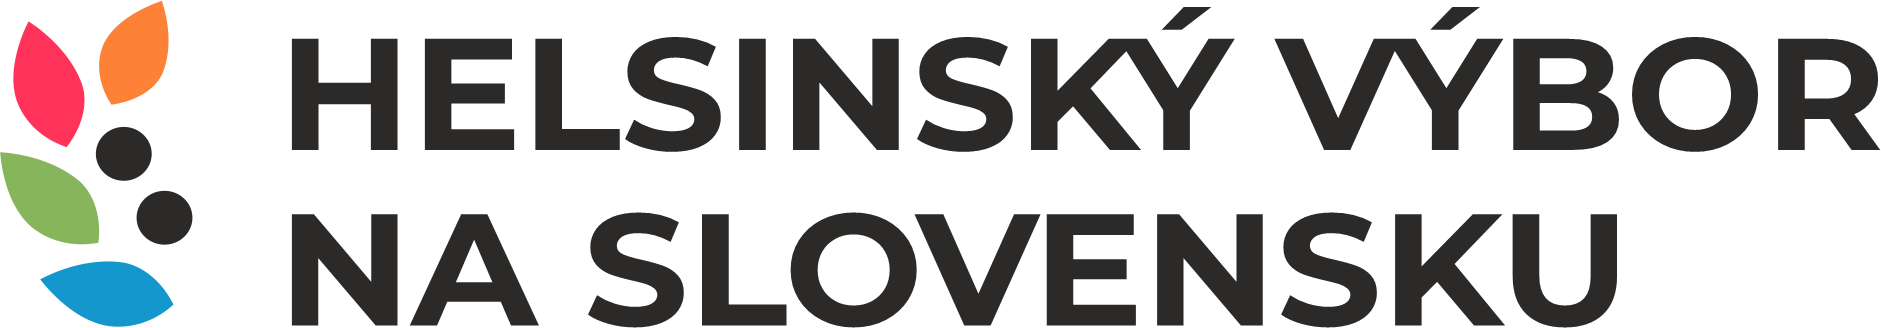 Helsinki Committee for Human Rights in Slovakia